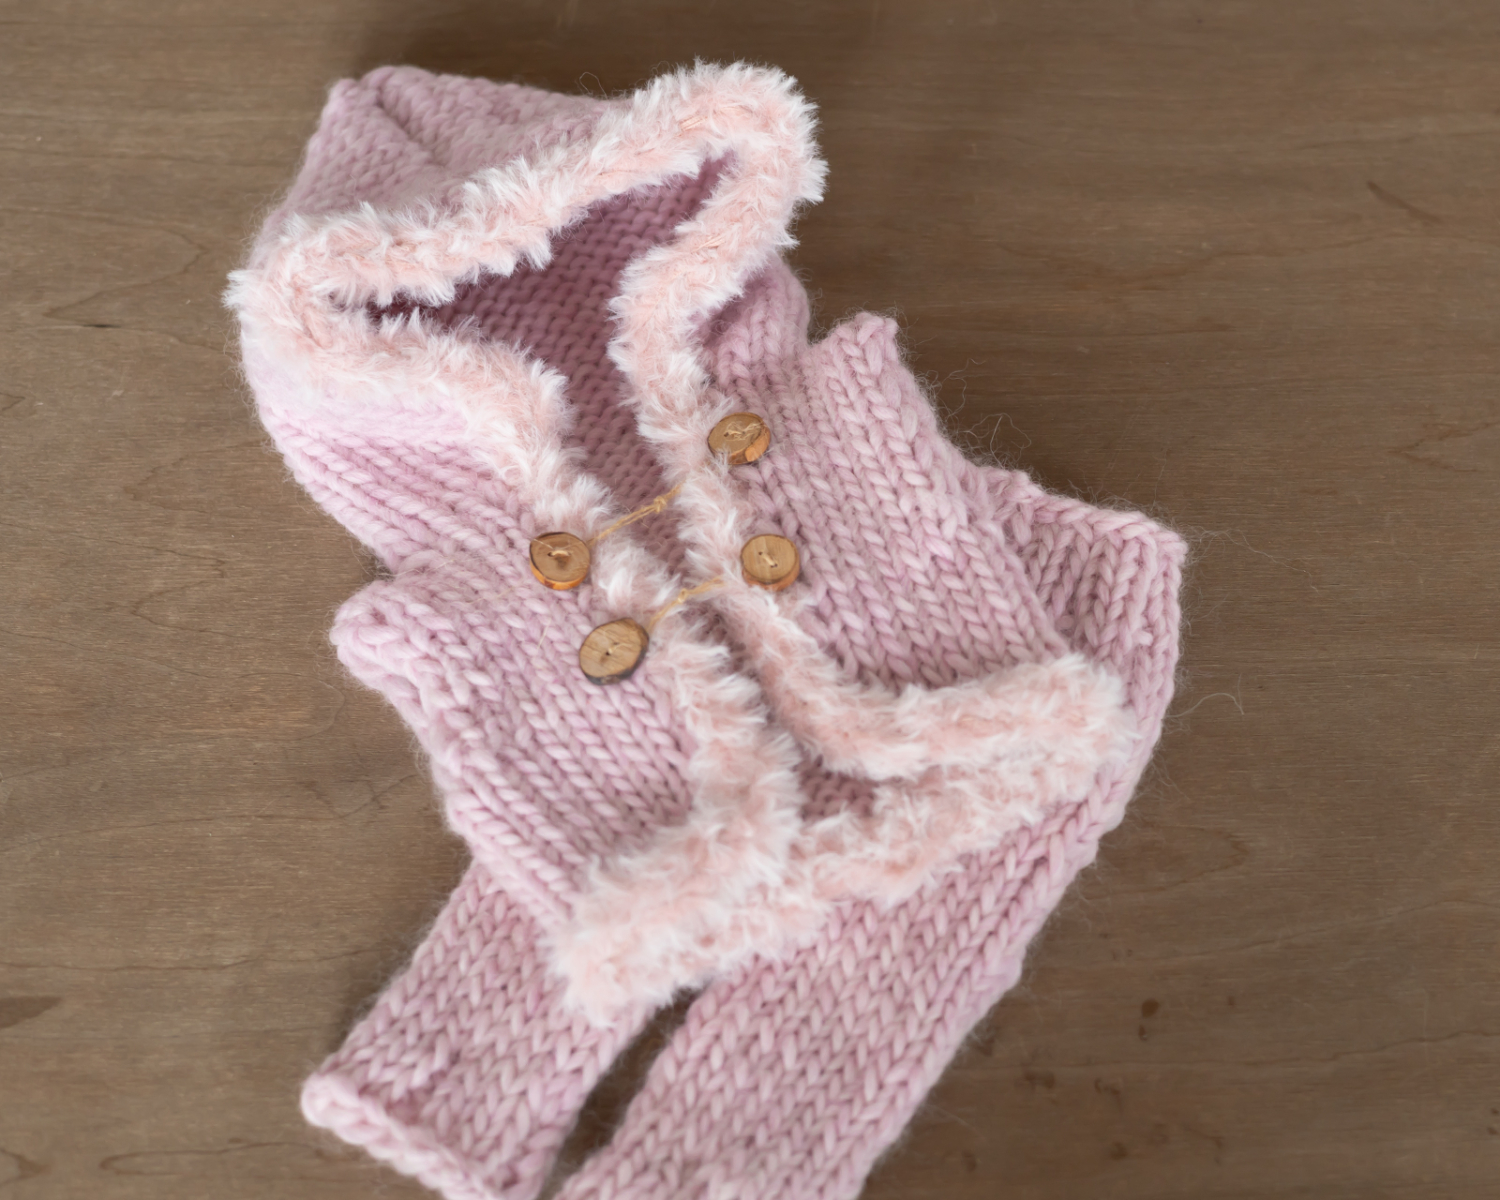 Pink knitted vest